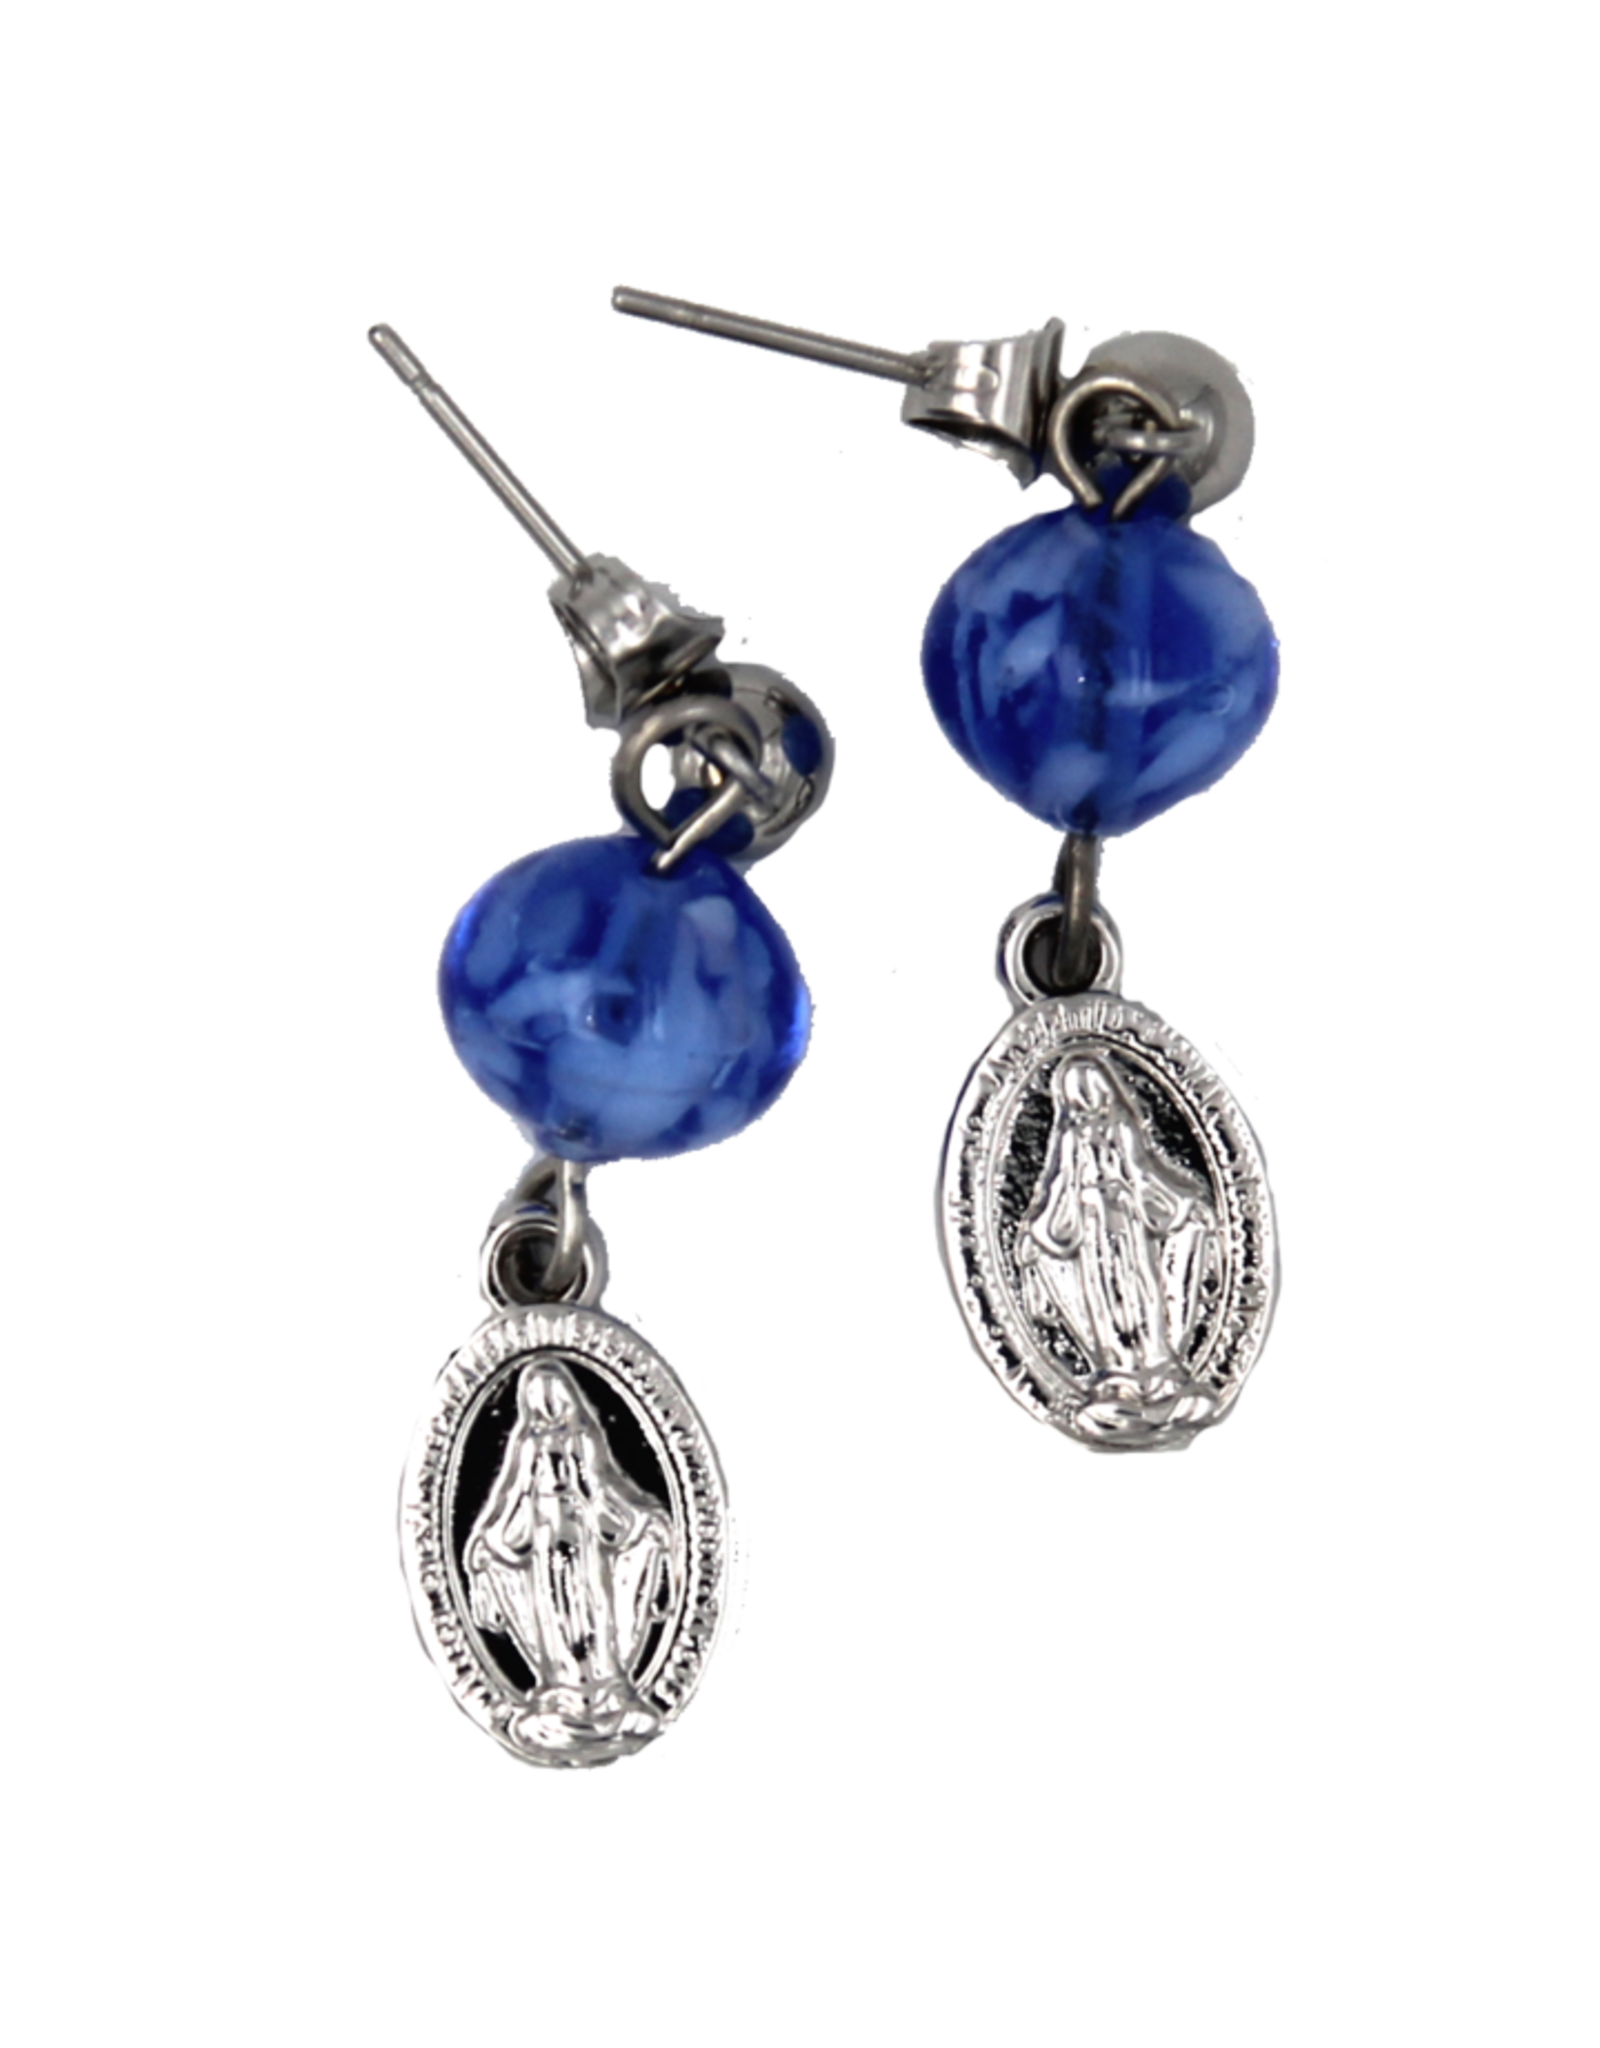 Tuscan Hills Earrings - Stainless Steel Miraculous Medal with Blue Murano Beads